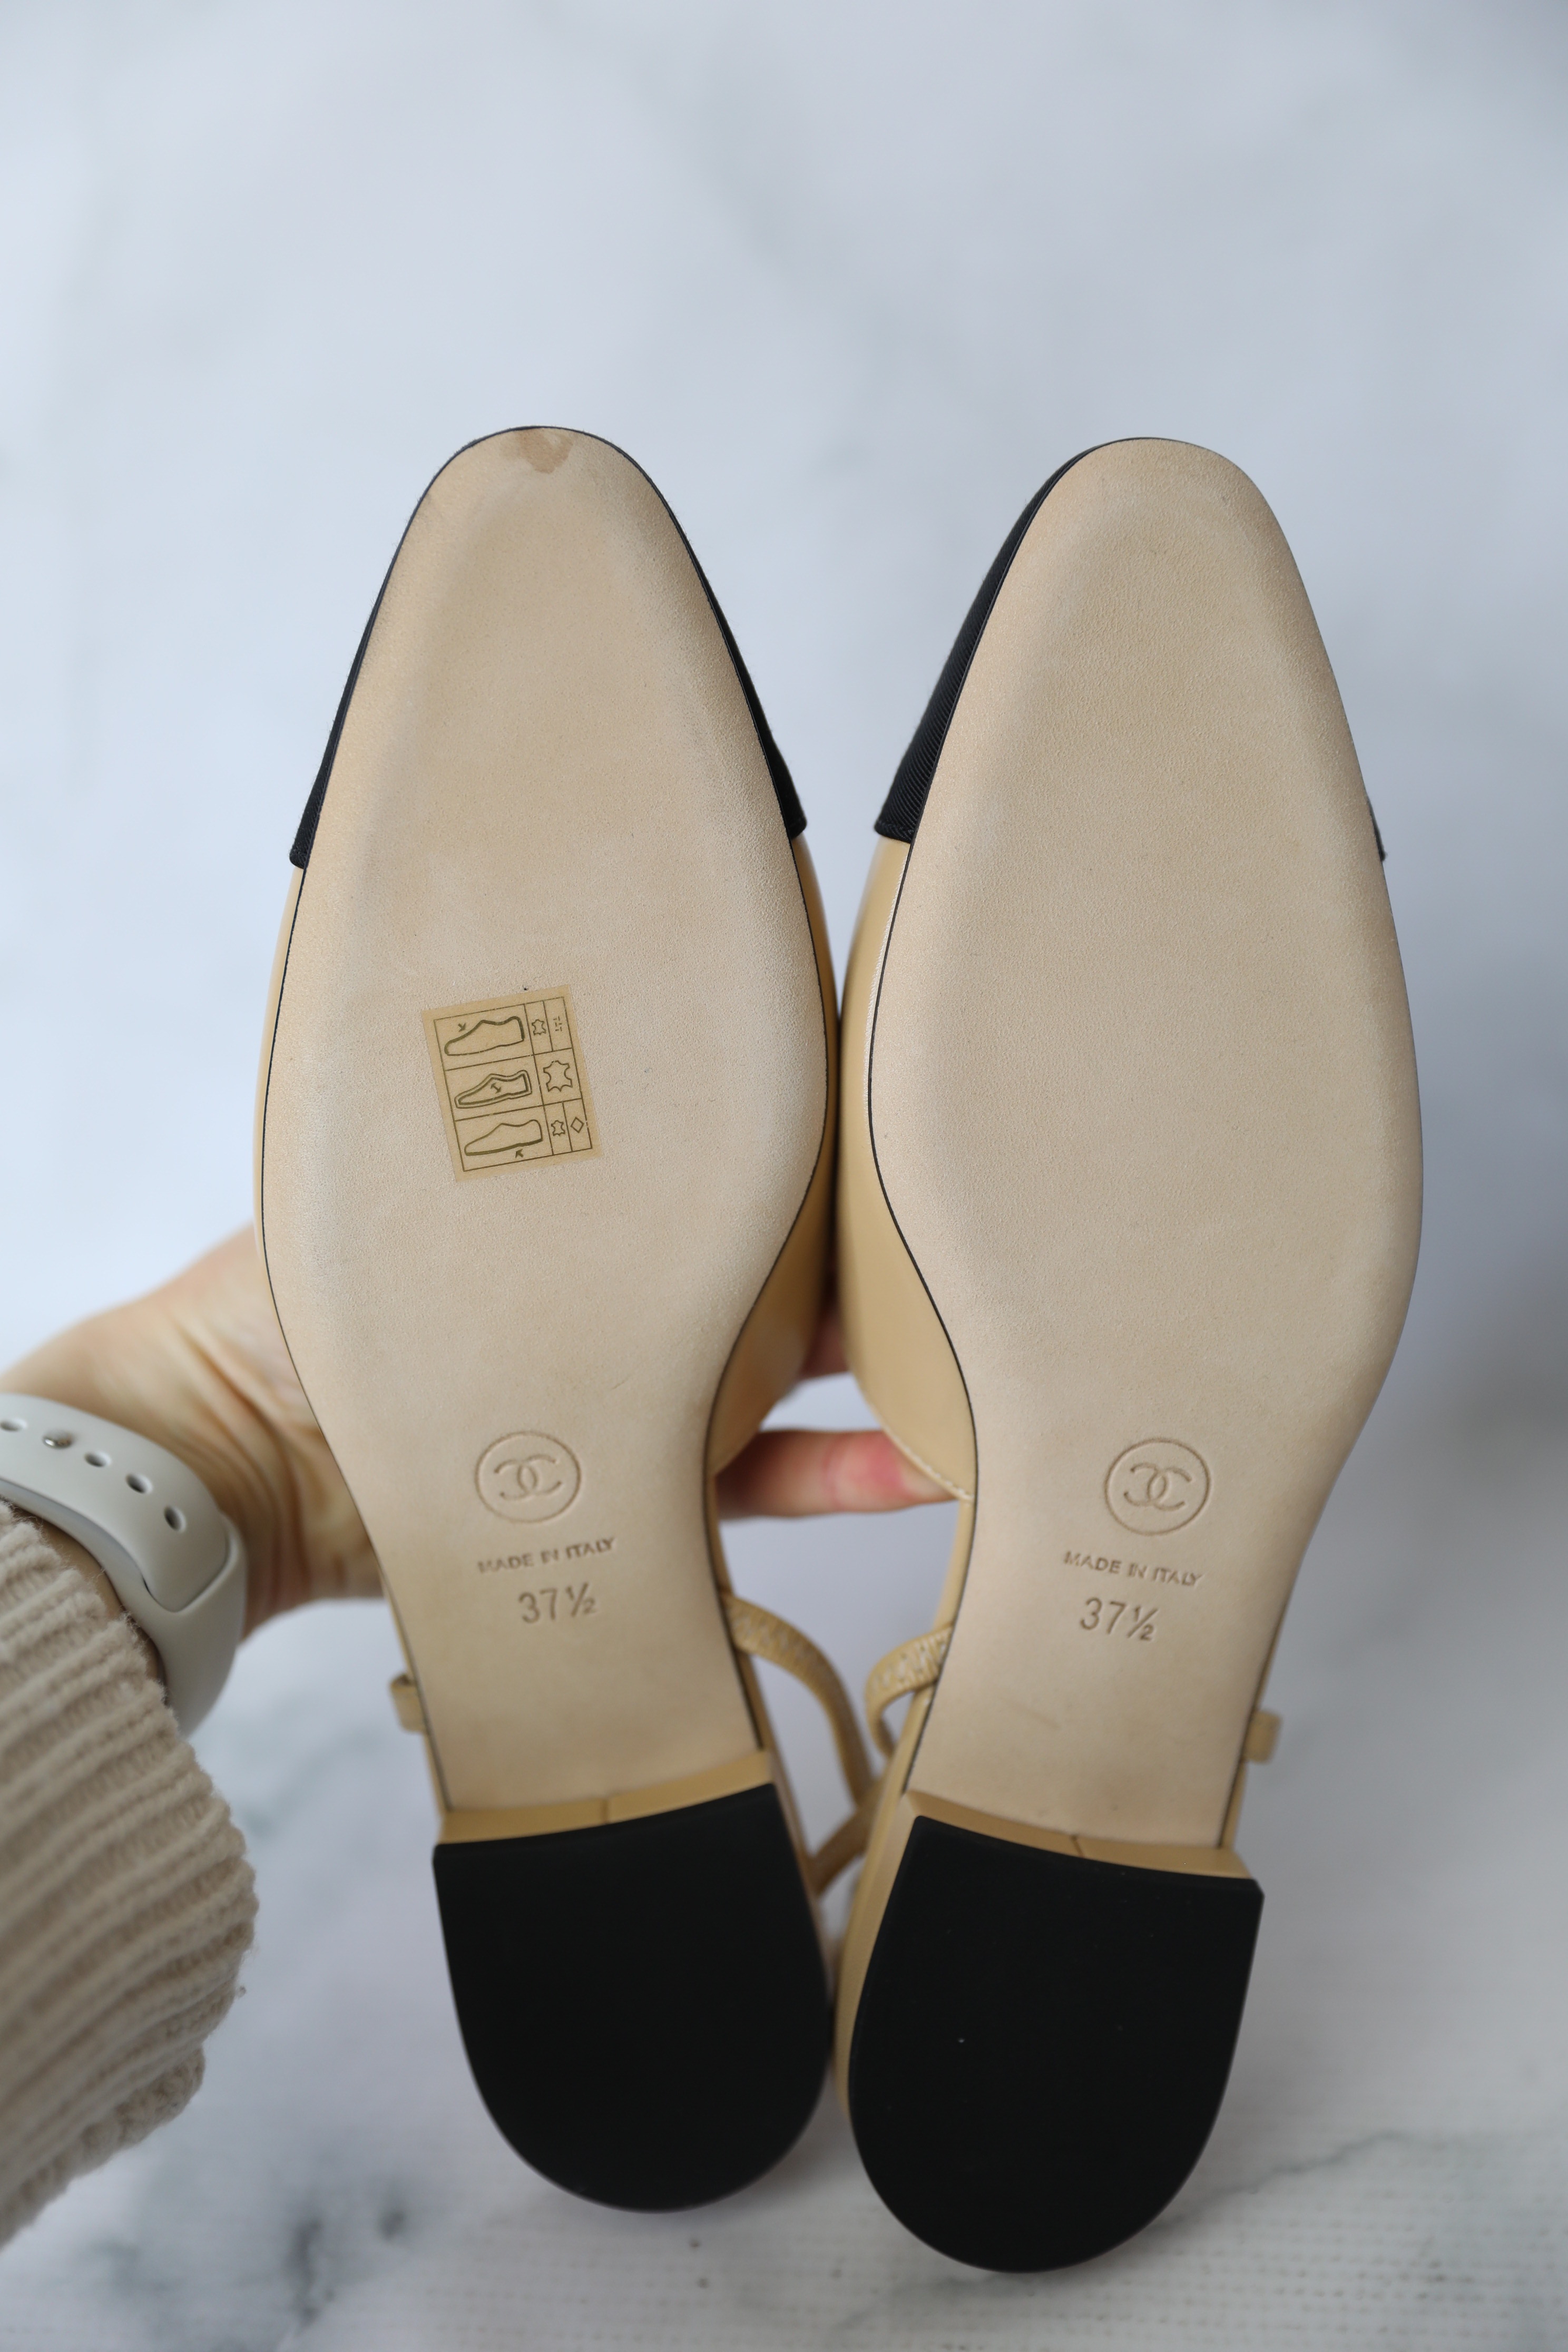 Chanel Shoes Slingback Flats, Beige and Black, Size 37.5, New in Box WA001